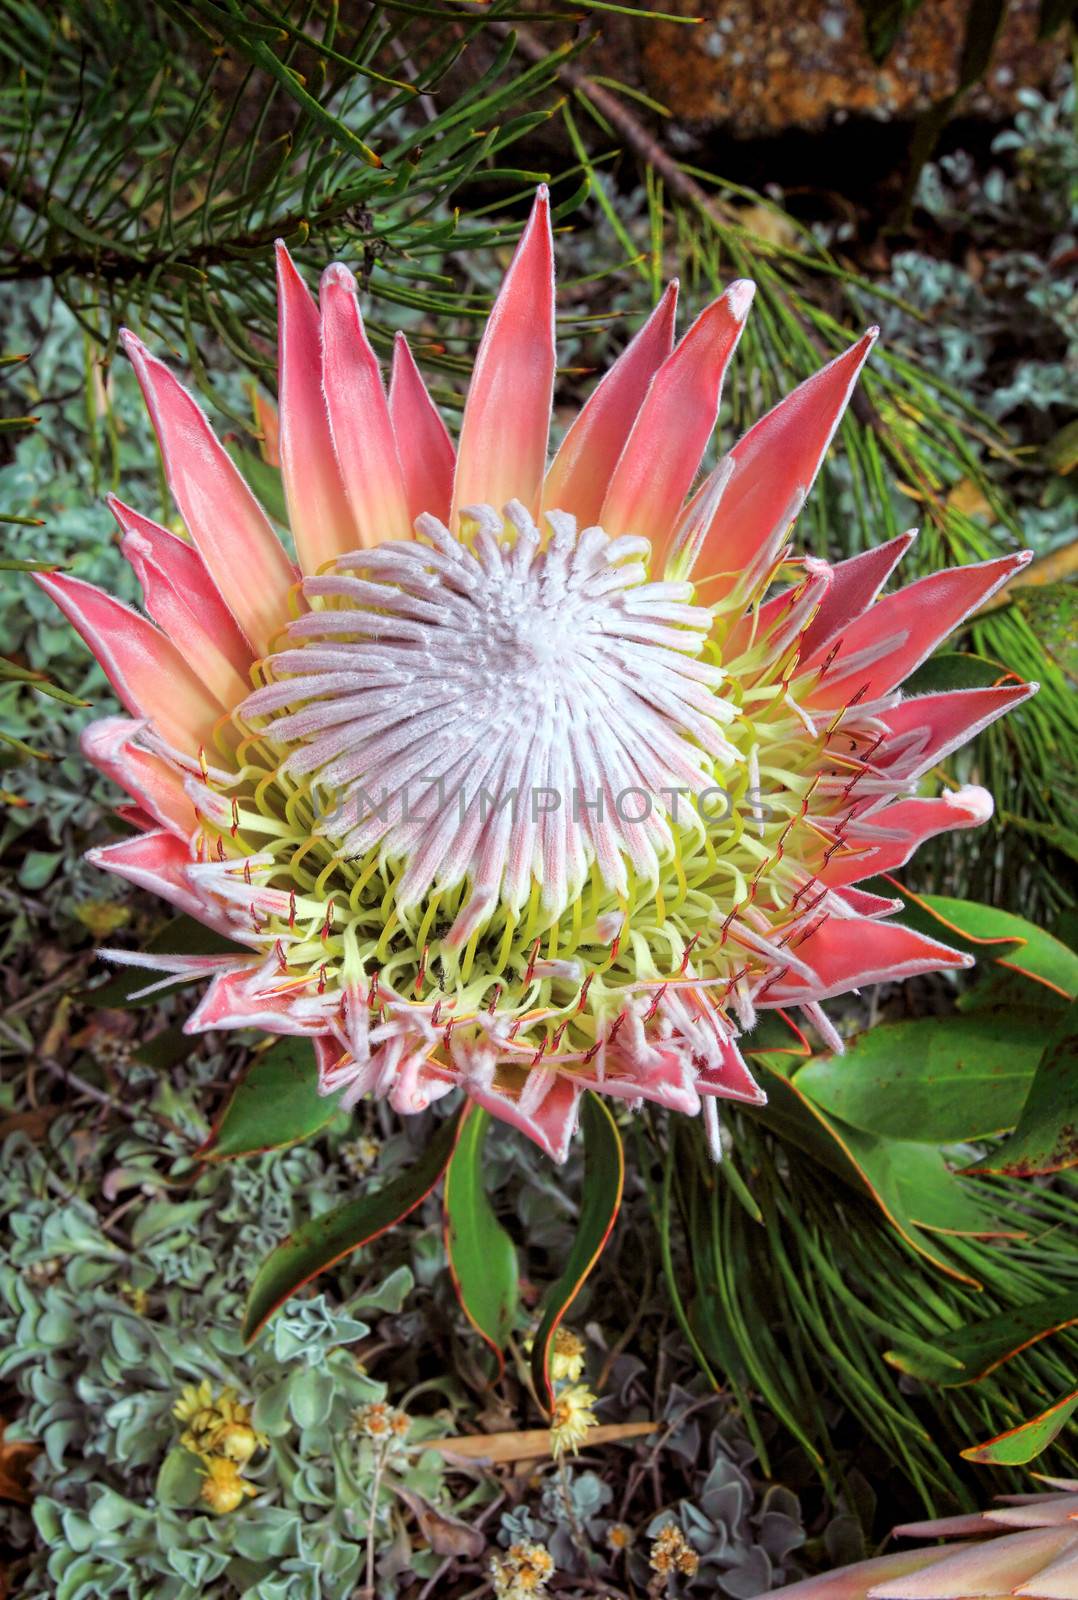 King Protea cynaroides bracts and flowers open by lovleah